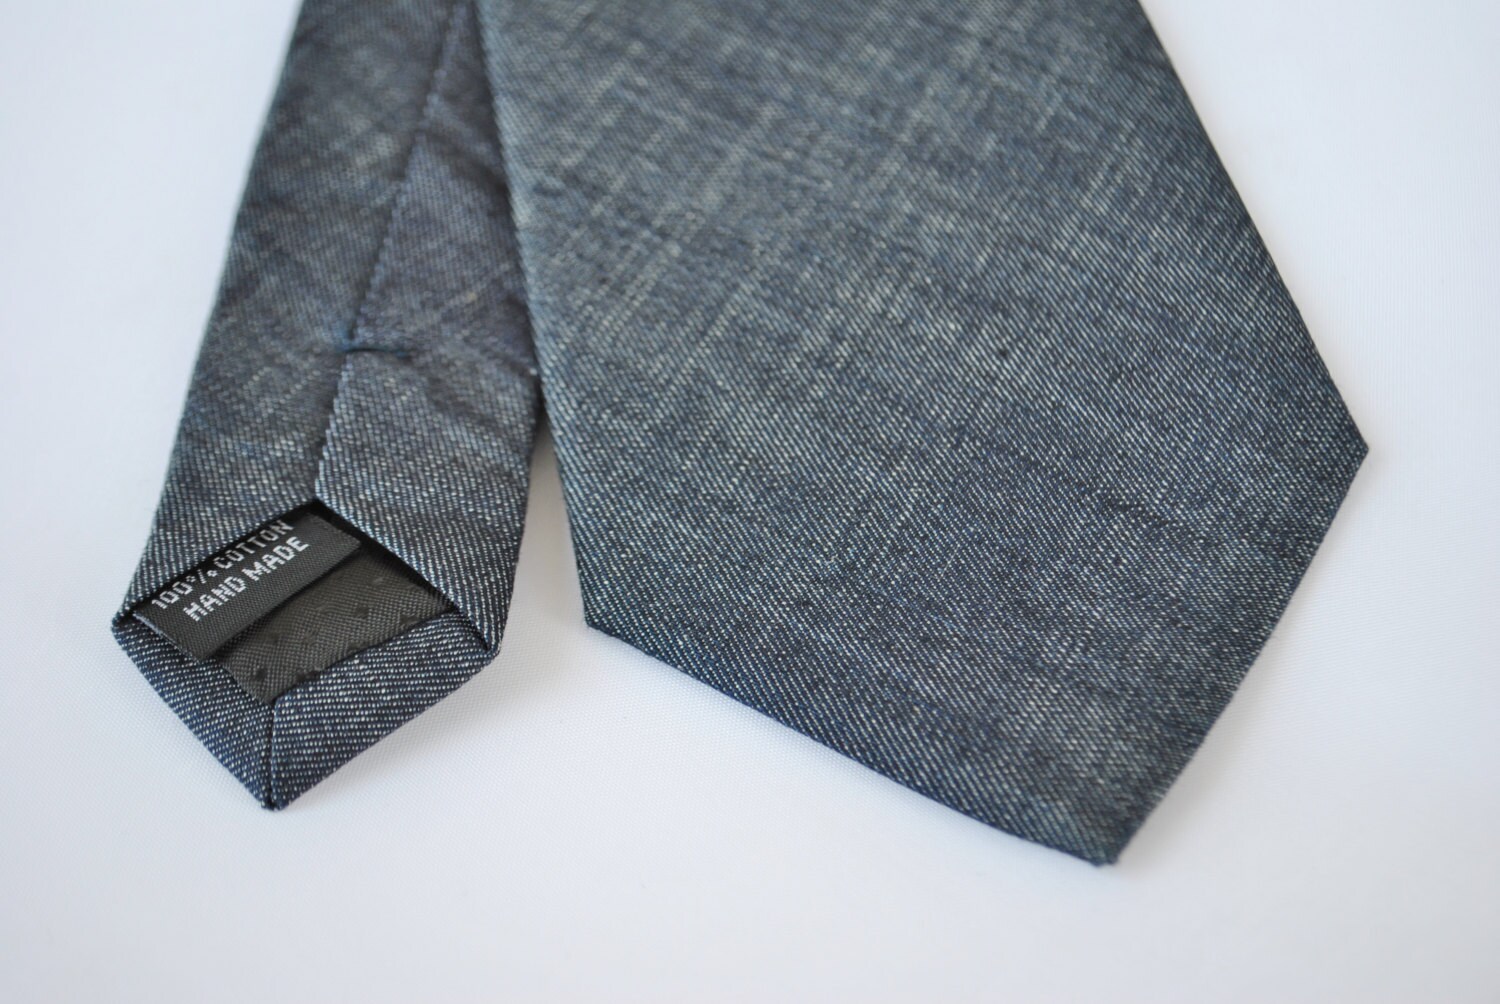 Plain Navy Blue Textured Linen Tie by Frederick Thomas FT1967 | Etsy